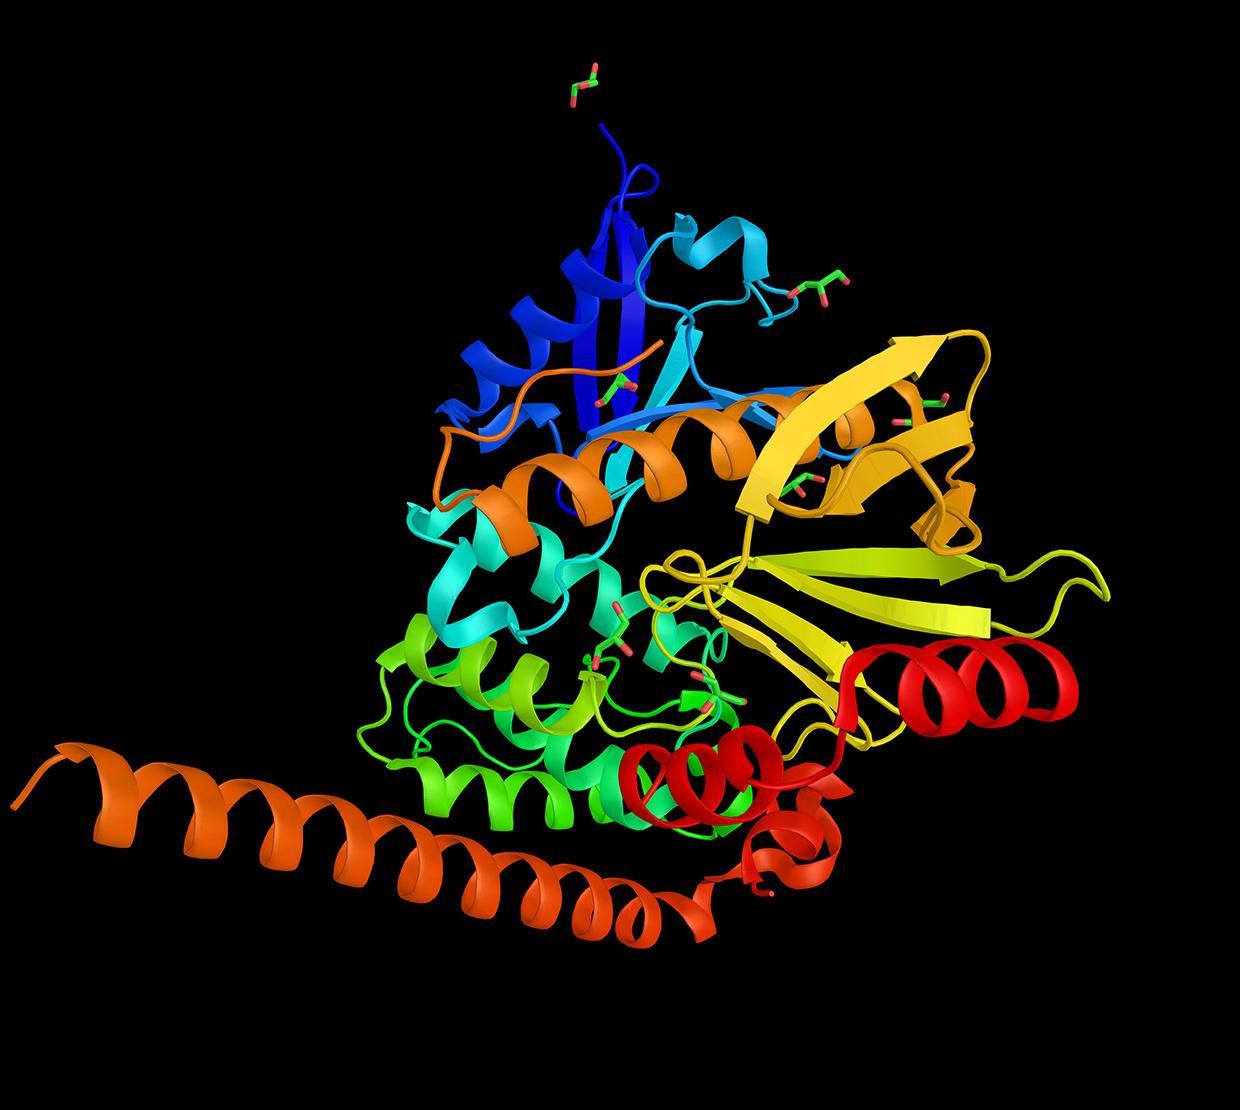 3d model of calprotectin protein